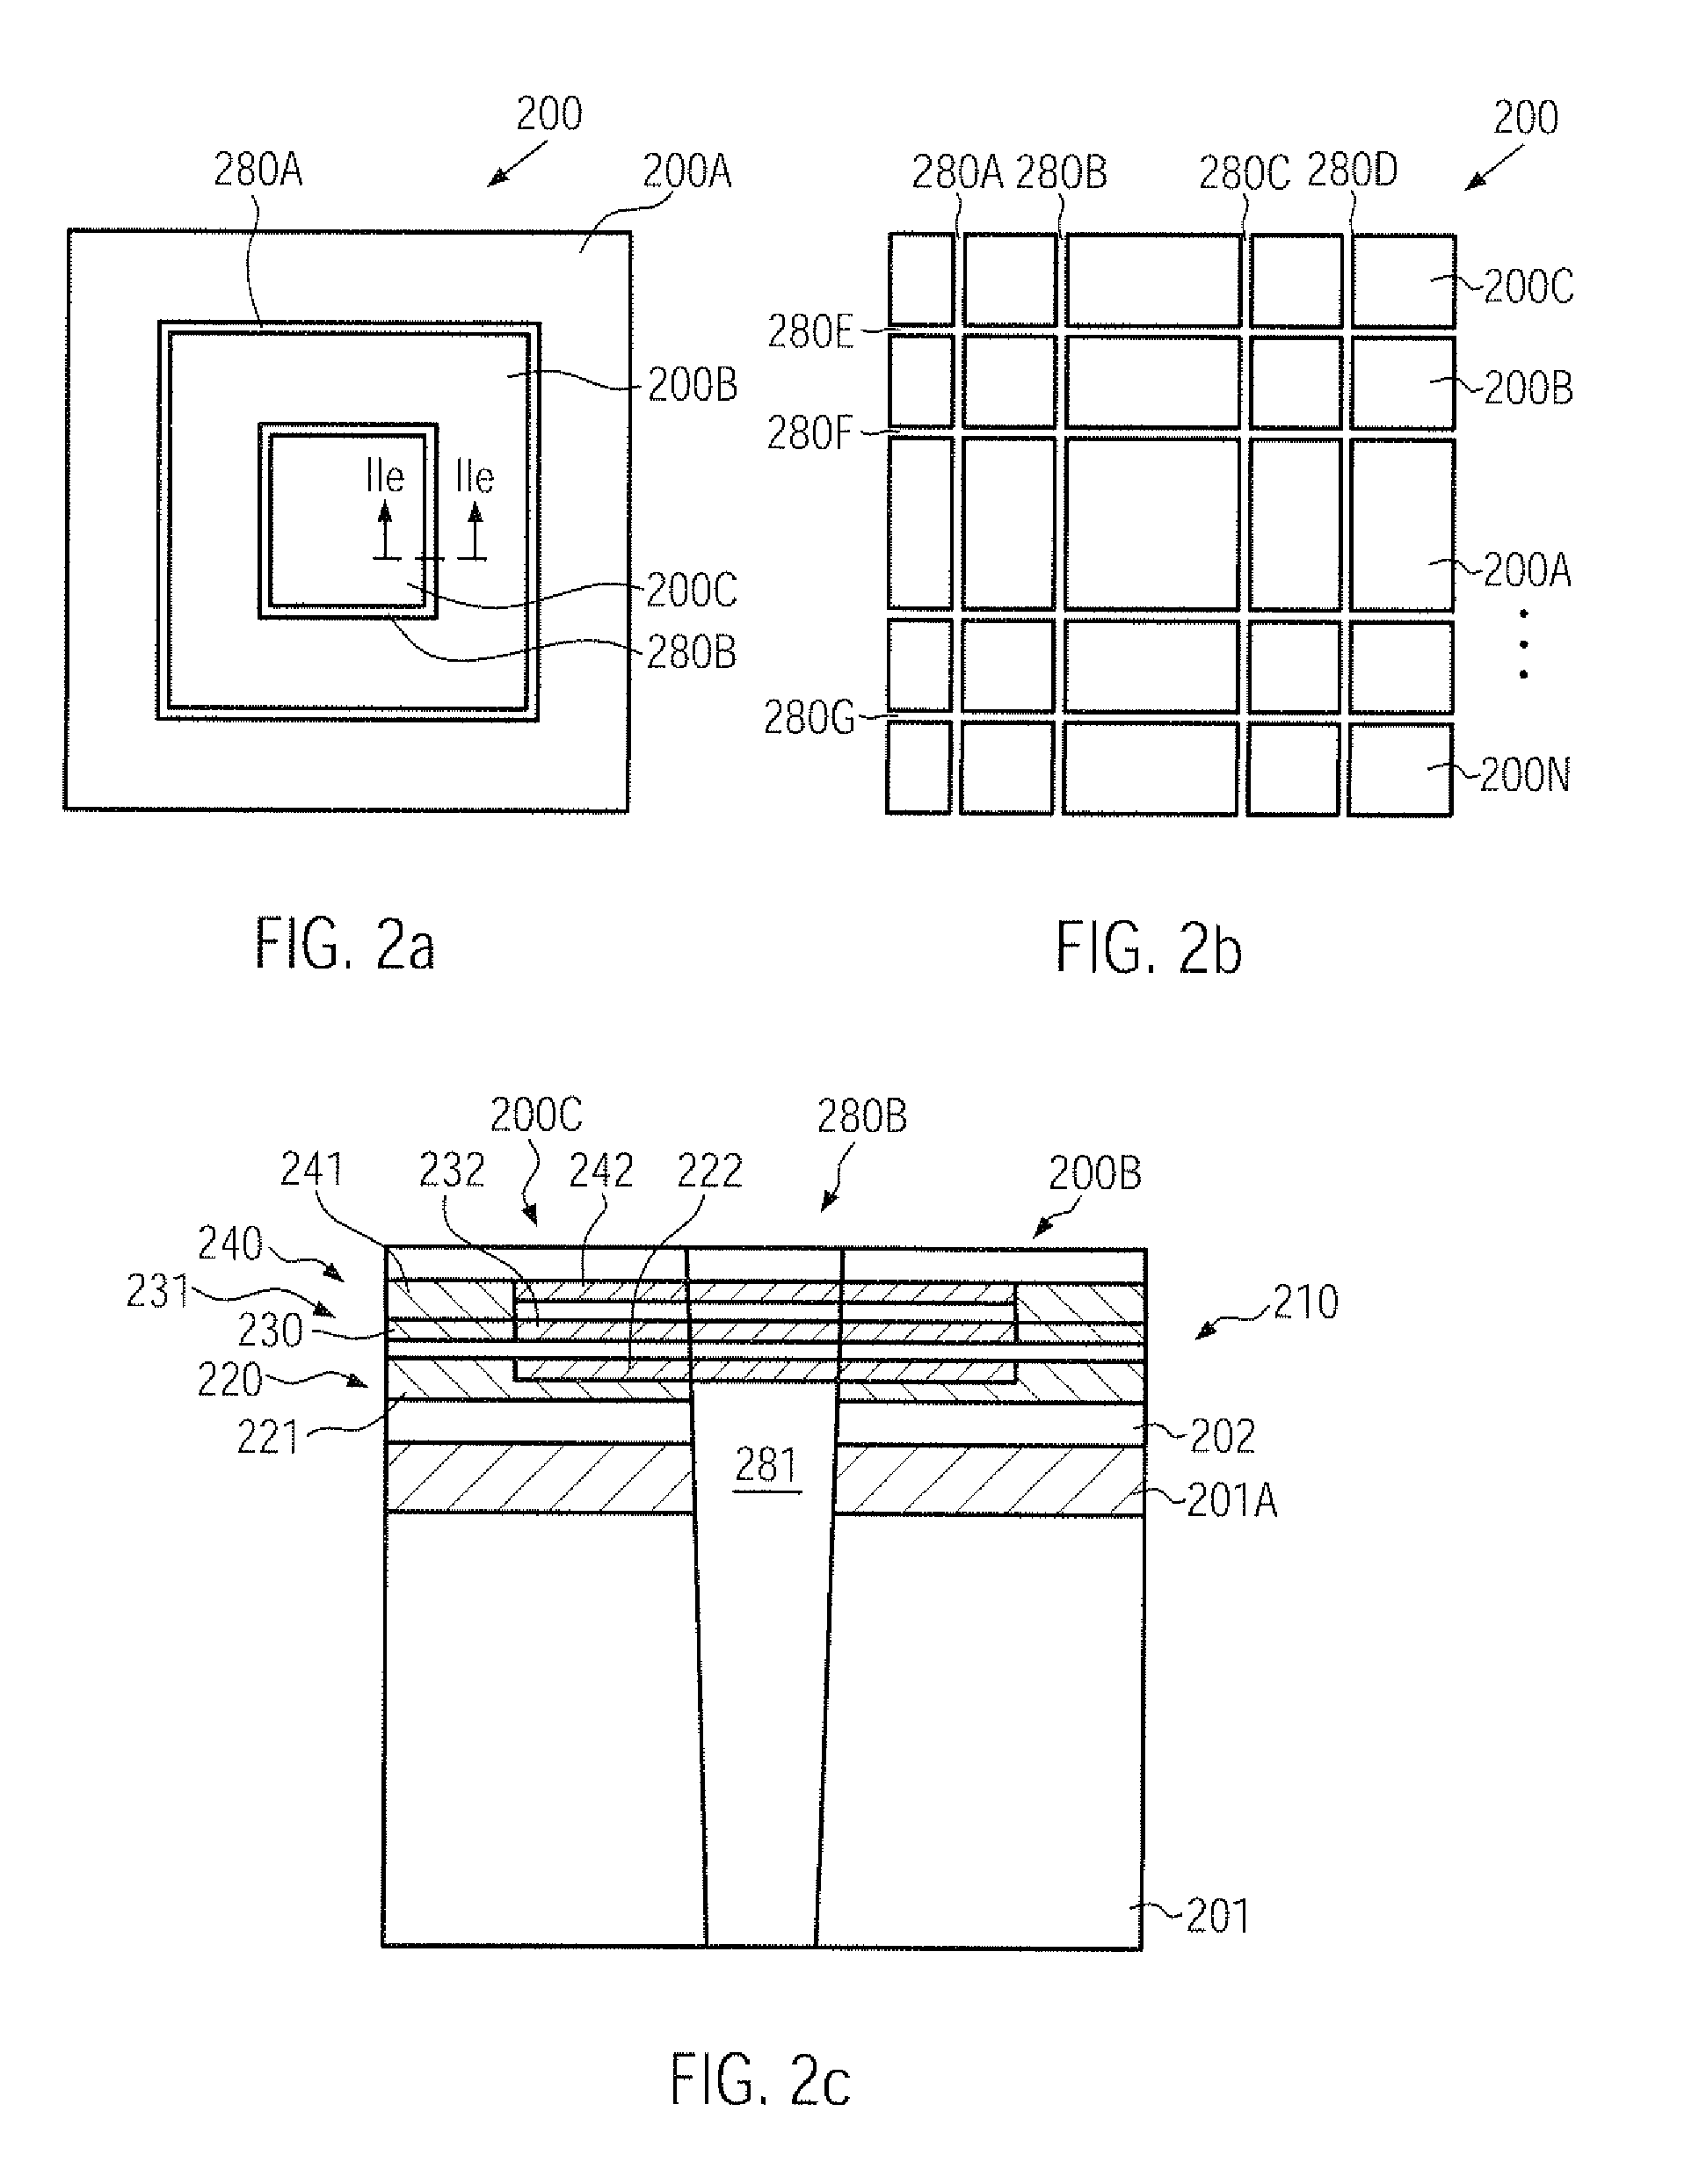 Semiconductor device including stress relaxation gaps for enhancing chip package interaction stability